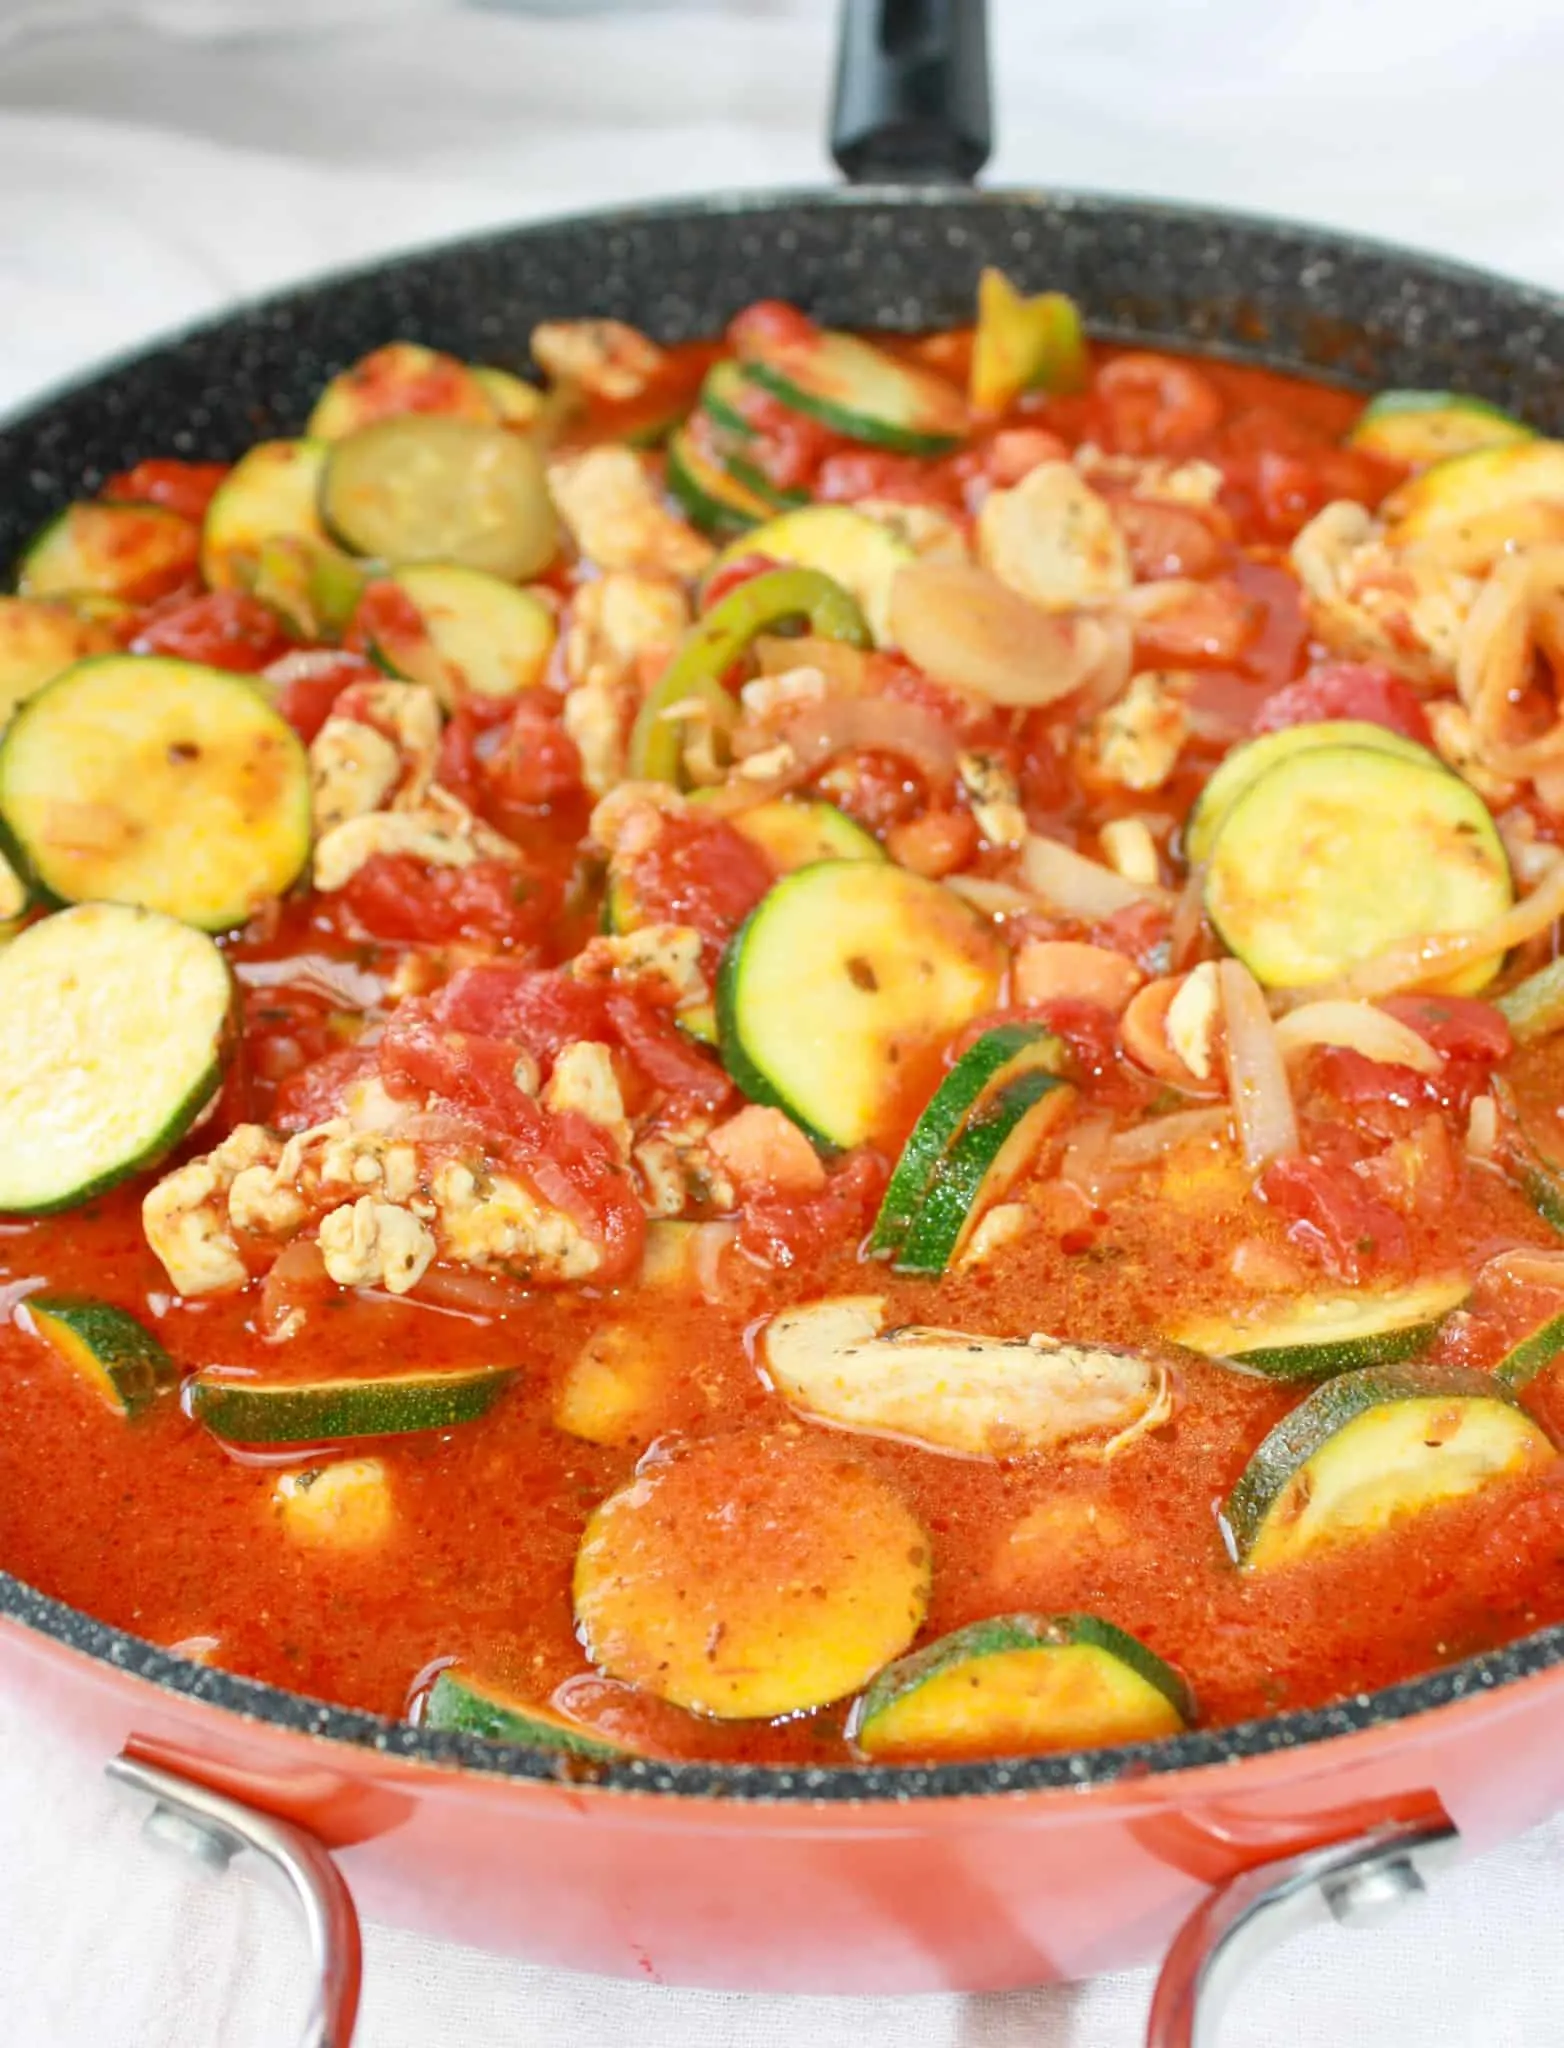 Chicken and Zucchini Skillet Dinner is a nice end of the day meal any time of the year but especially when you have an abundance of zucchini.